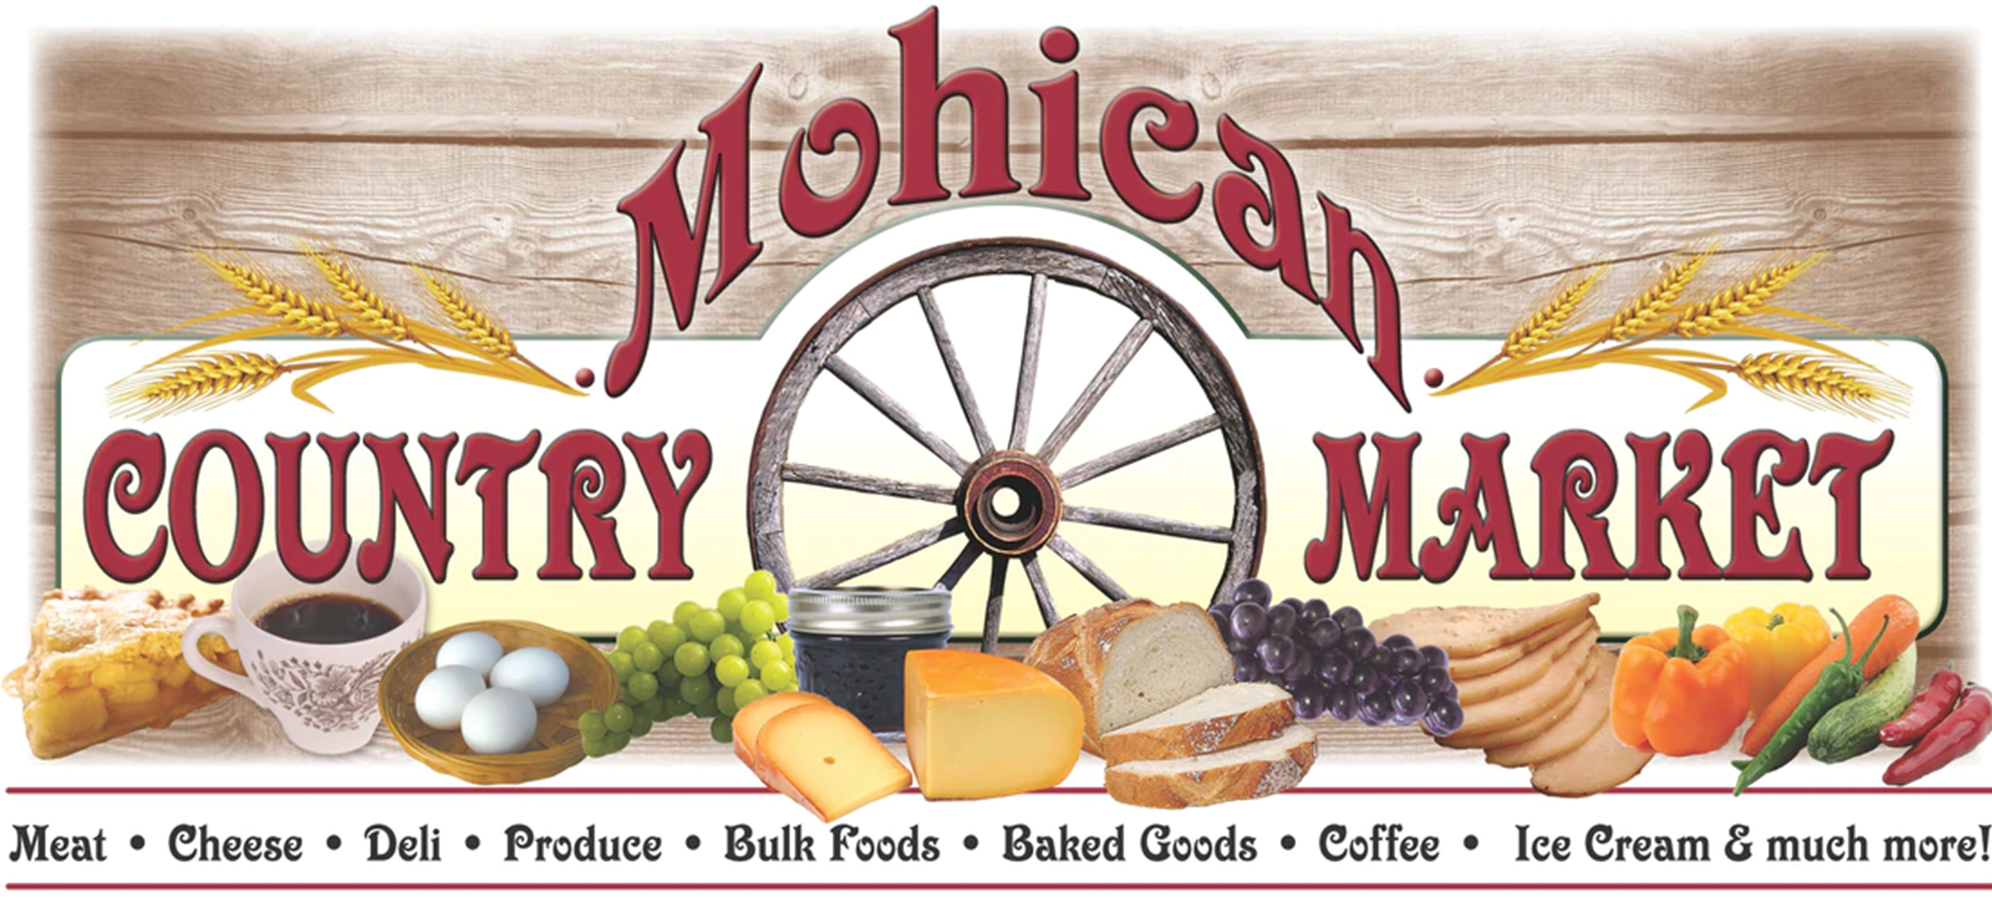 Mohican Valley Market